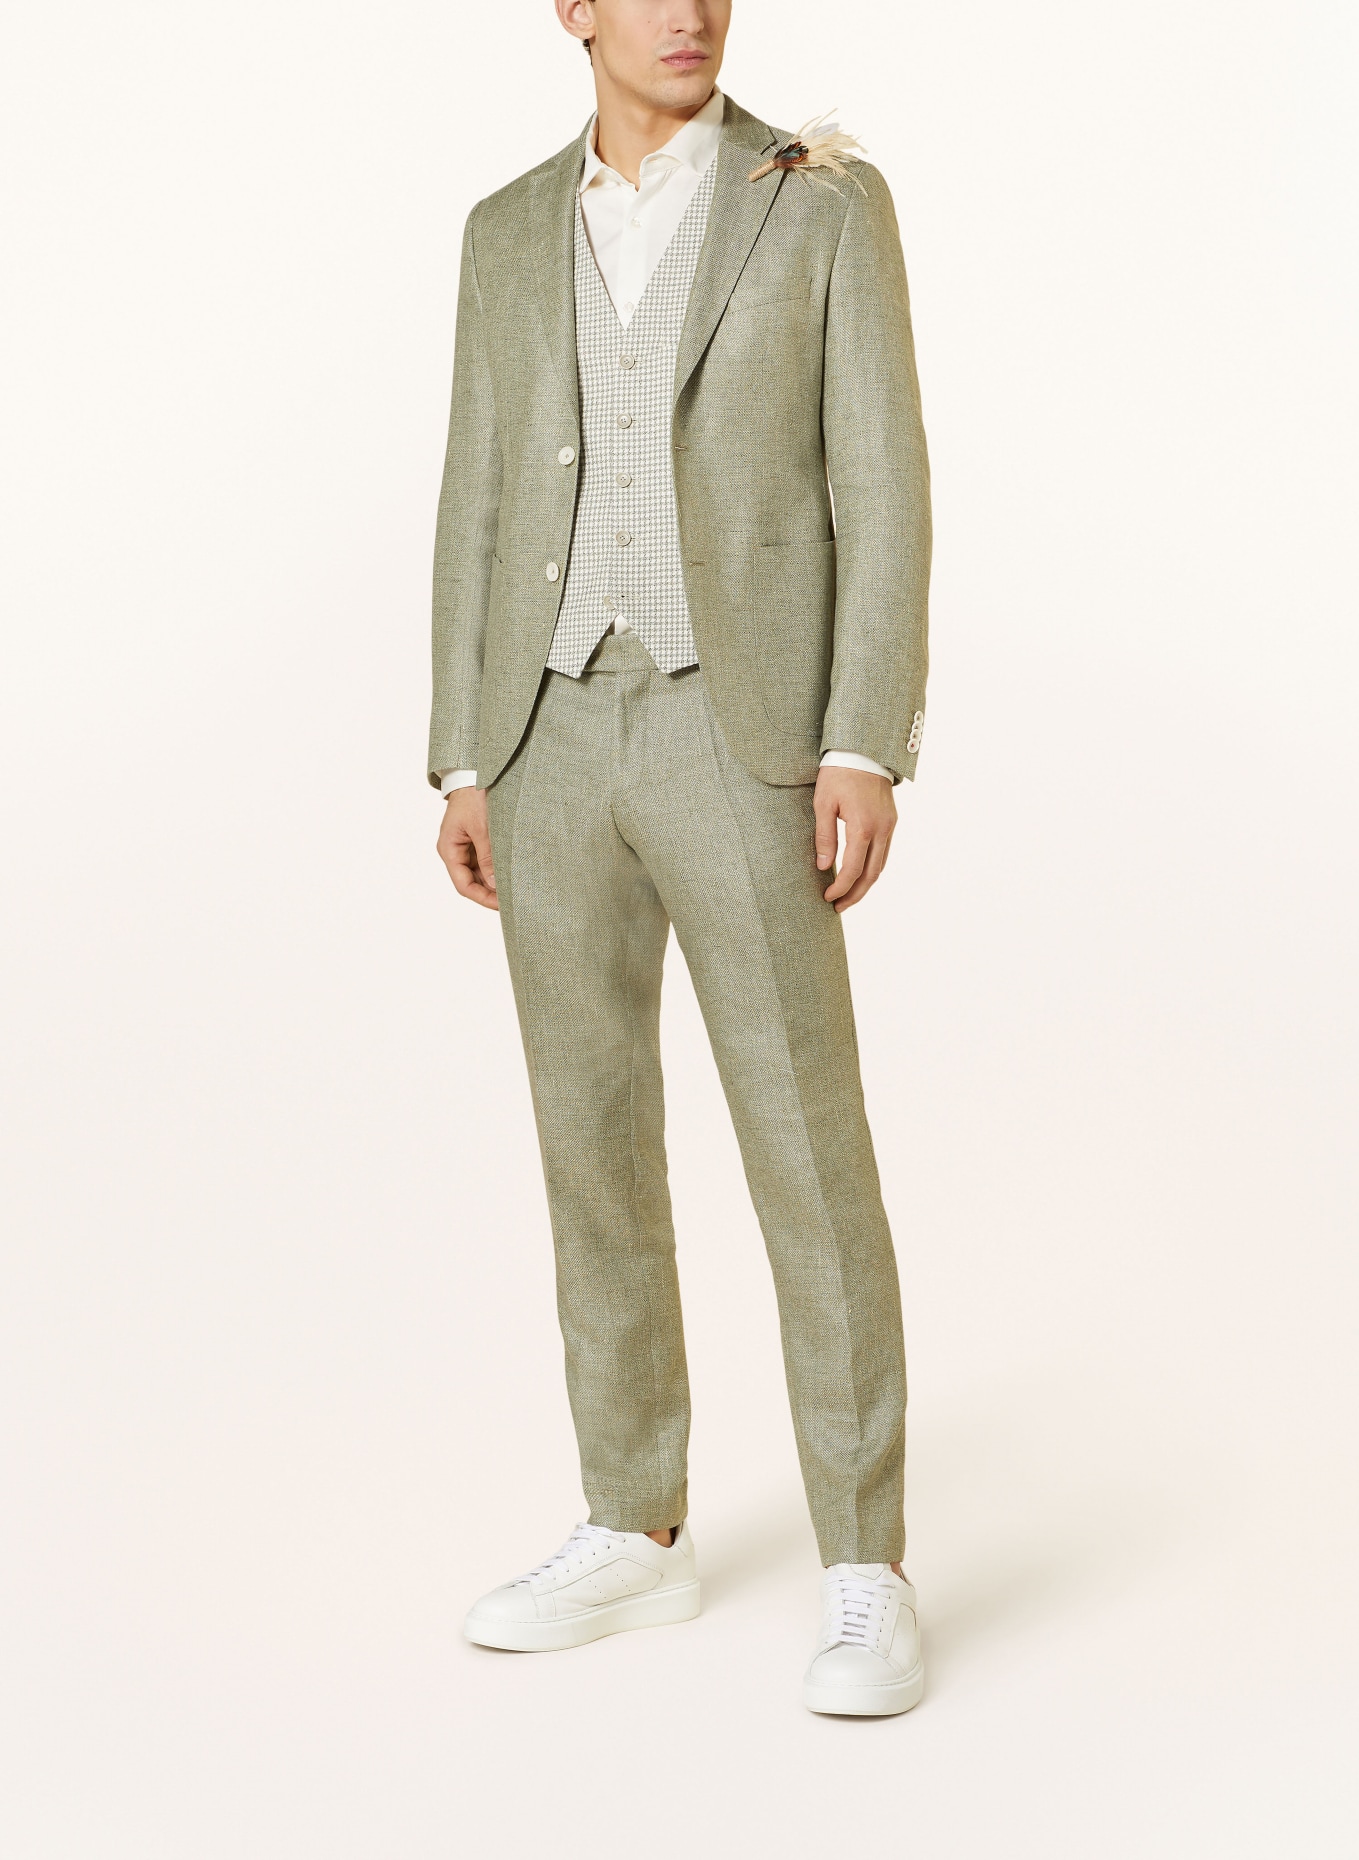 CG - CLUB of GENTS Suit trousers CG PACO slim fit with linen, Color: 52 gruen mittel (Image 2)